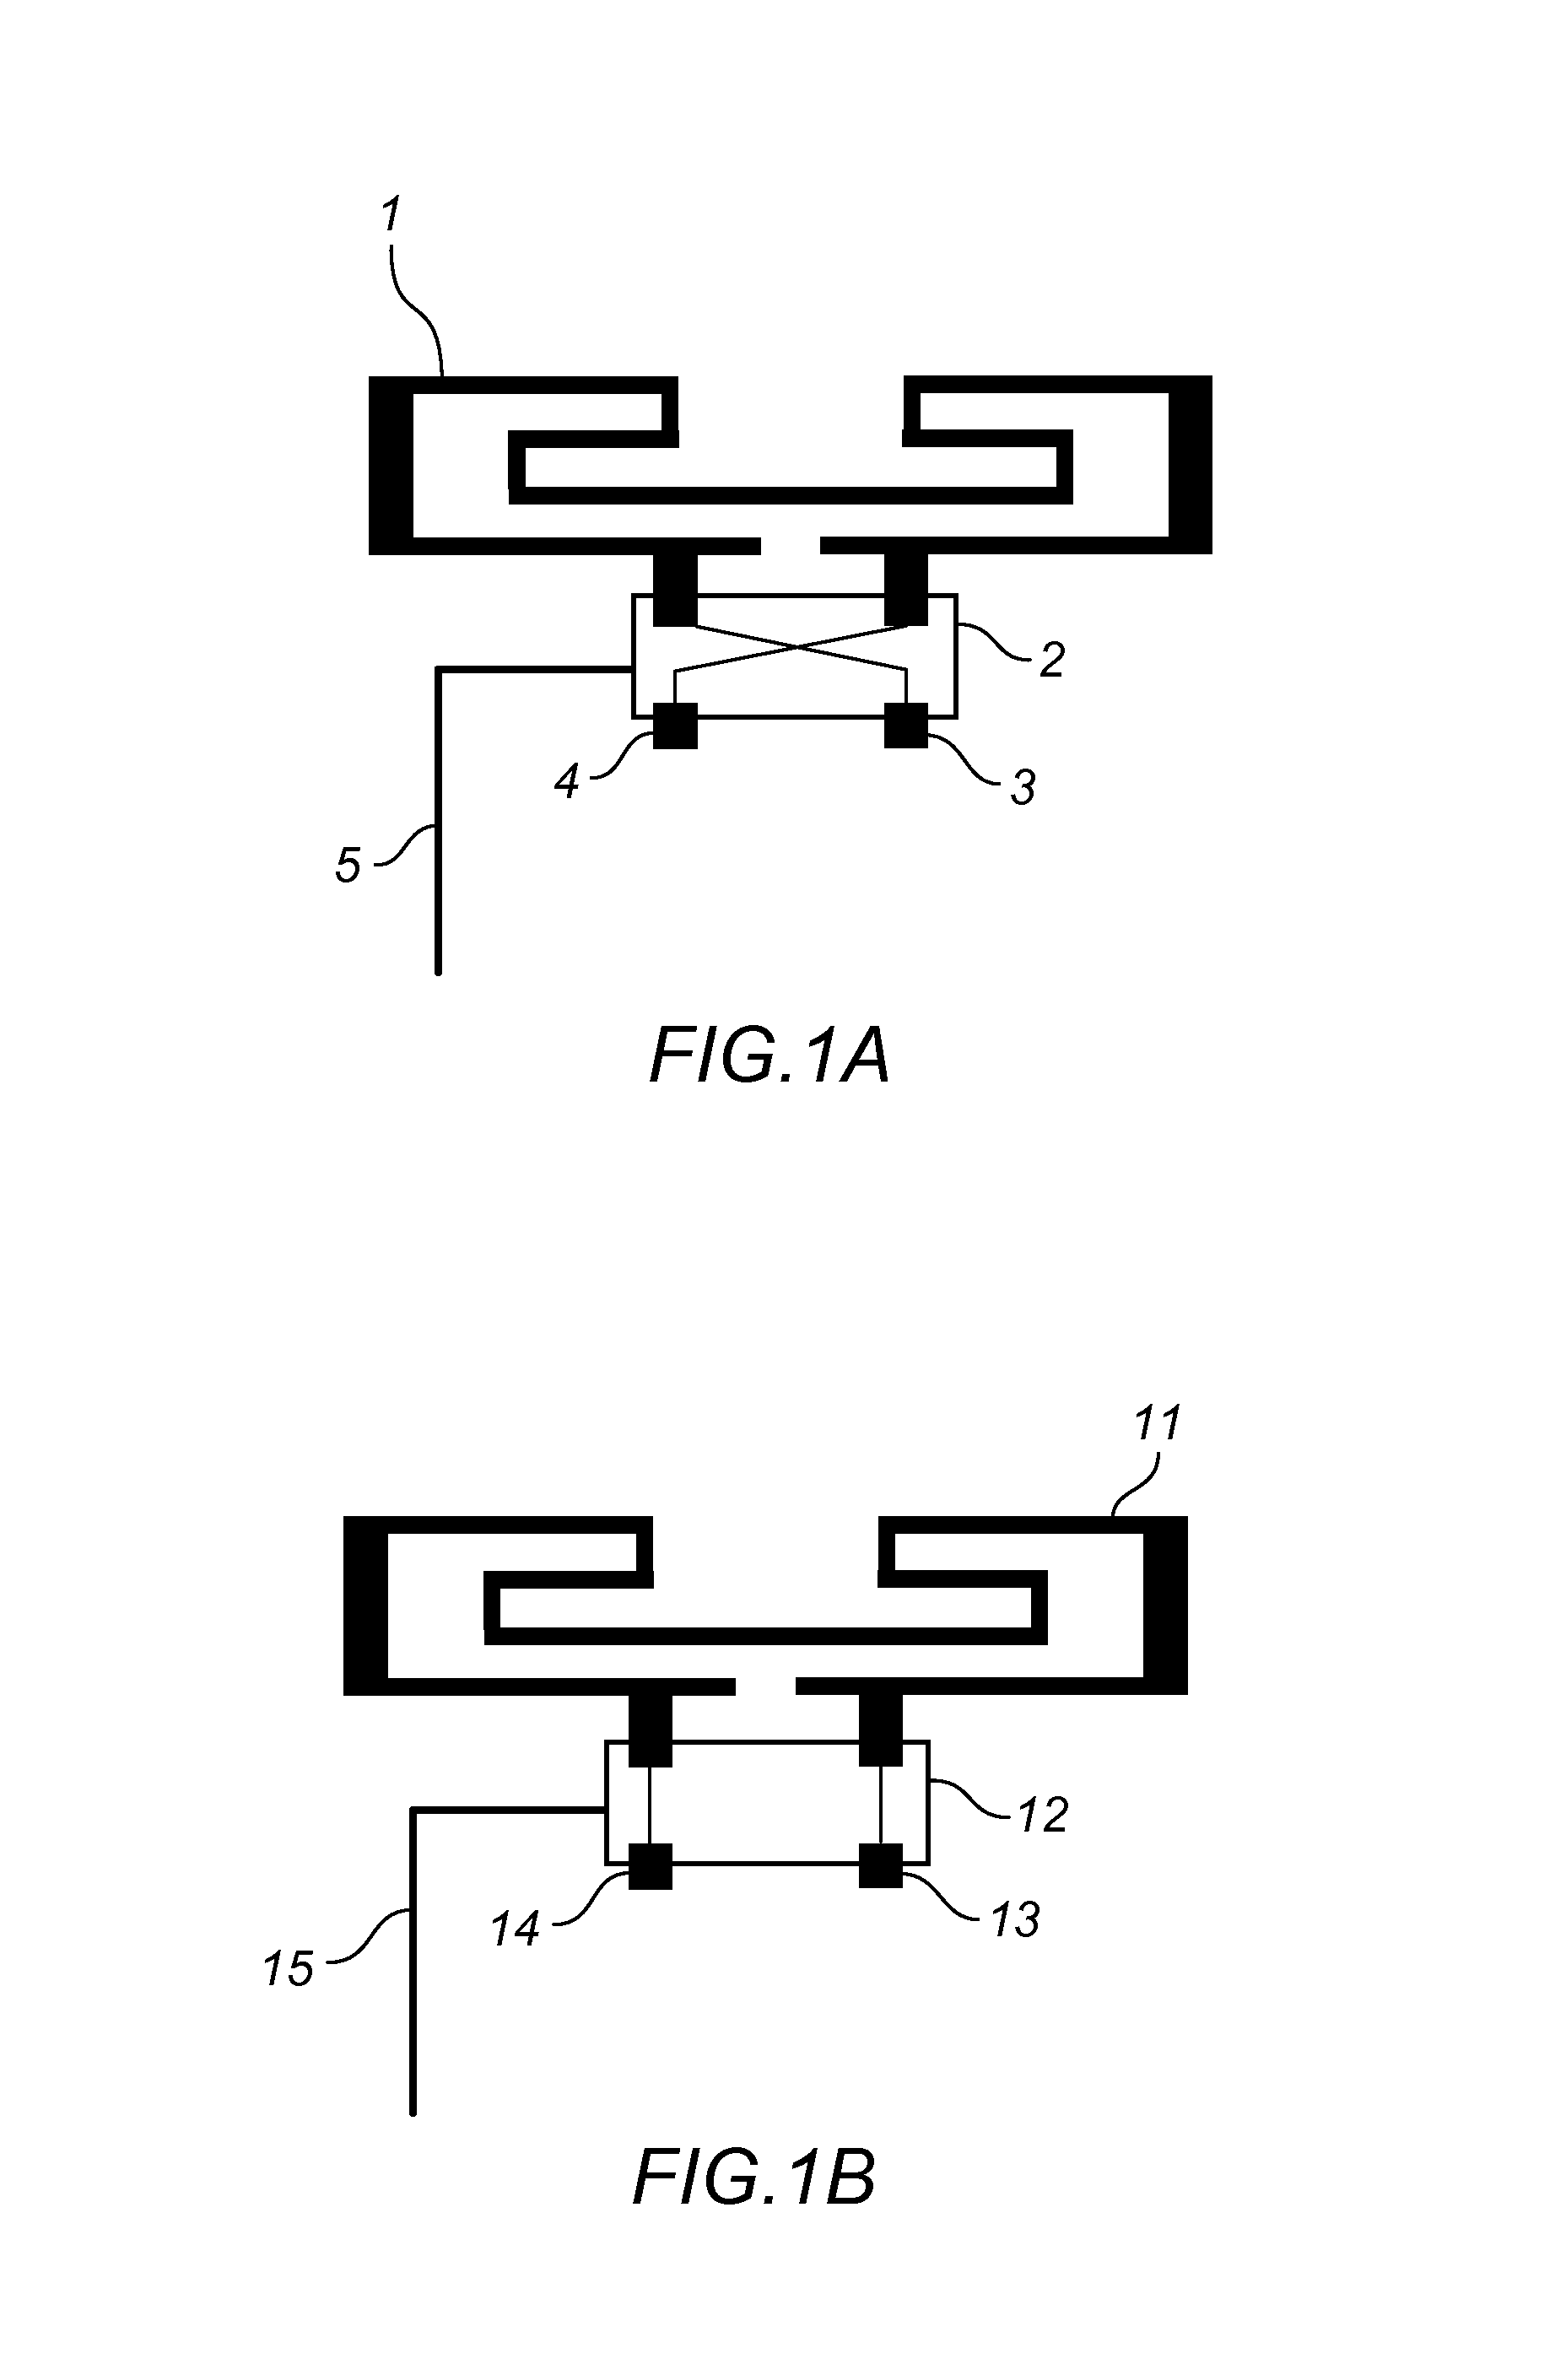 Loop antenna with switchable feeding and grounding points